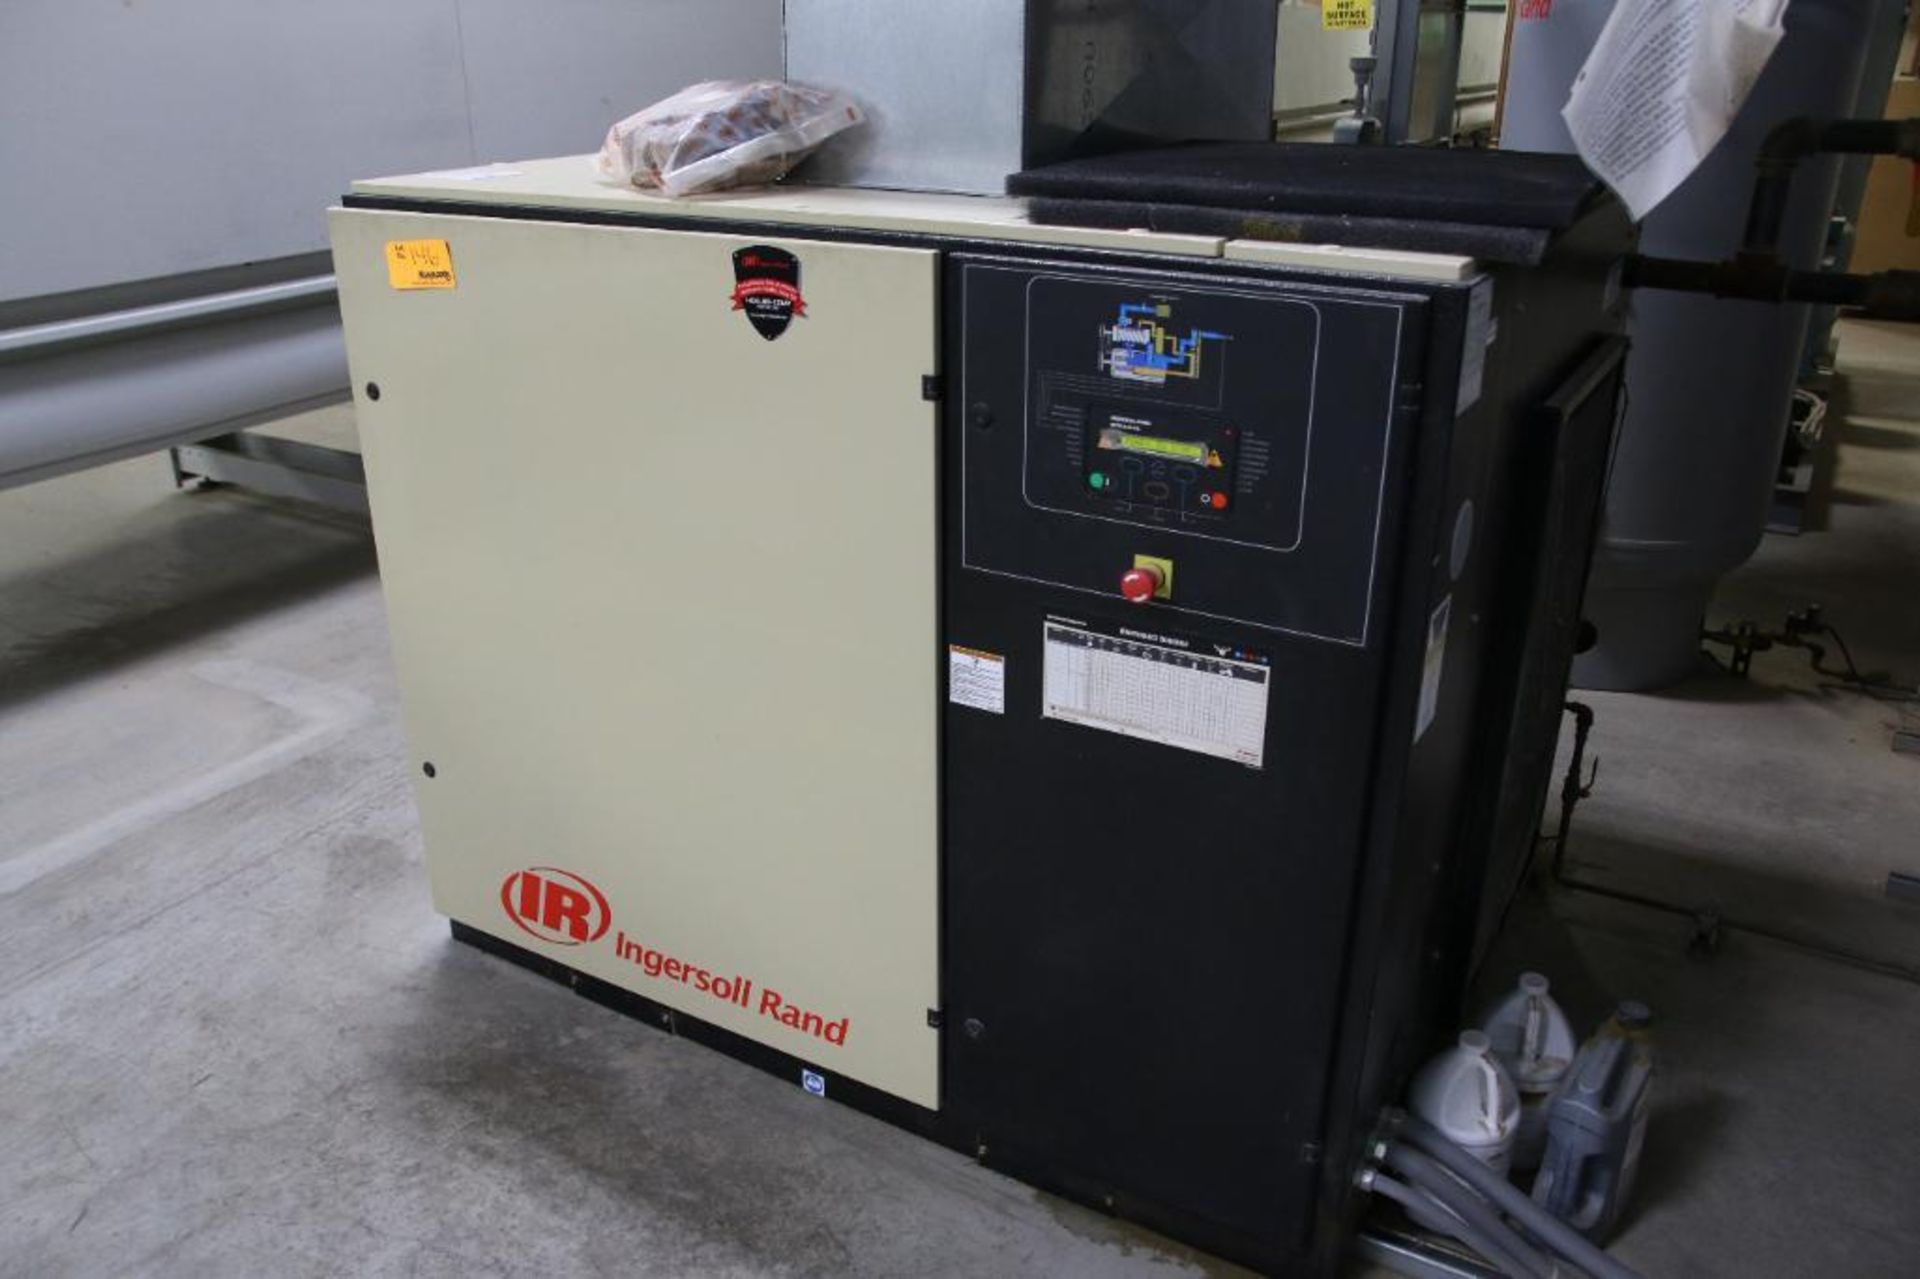 Ingersoll Rand UP6-50PEI-125 50-HP Rotary Screw Total Air System, 460V, 3 Phase, 125PSI, S/N CBV-106